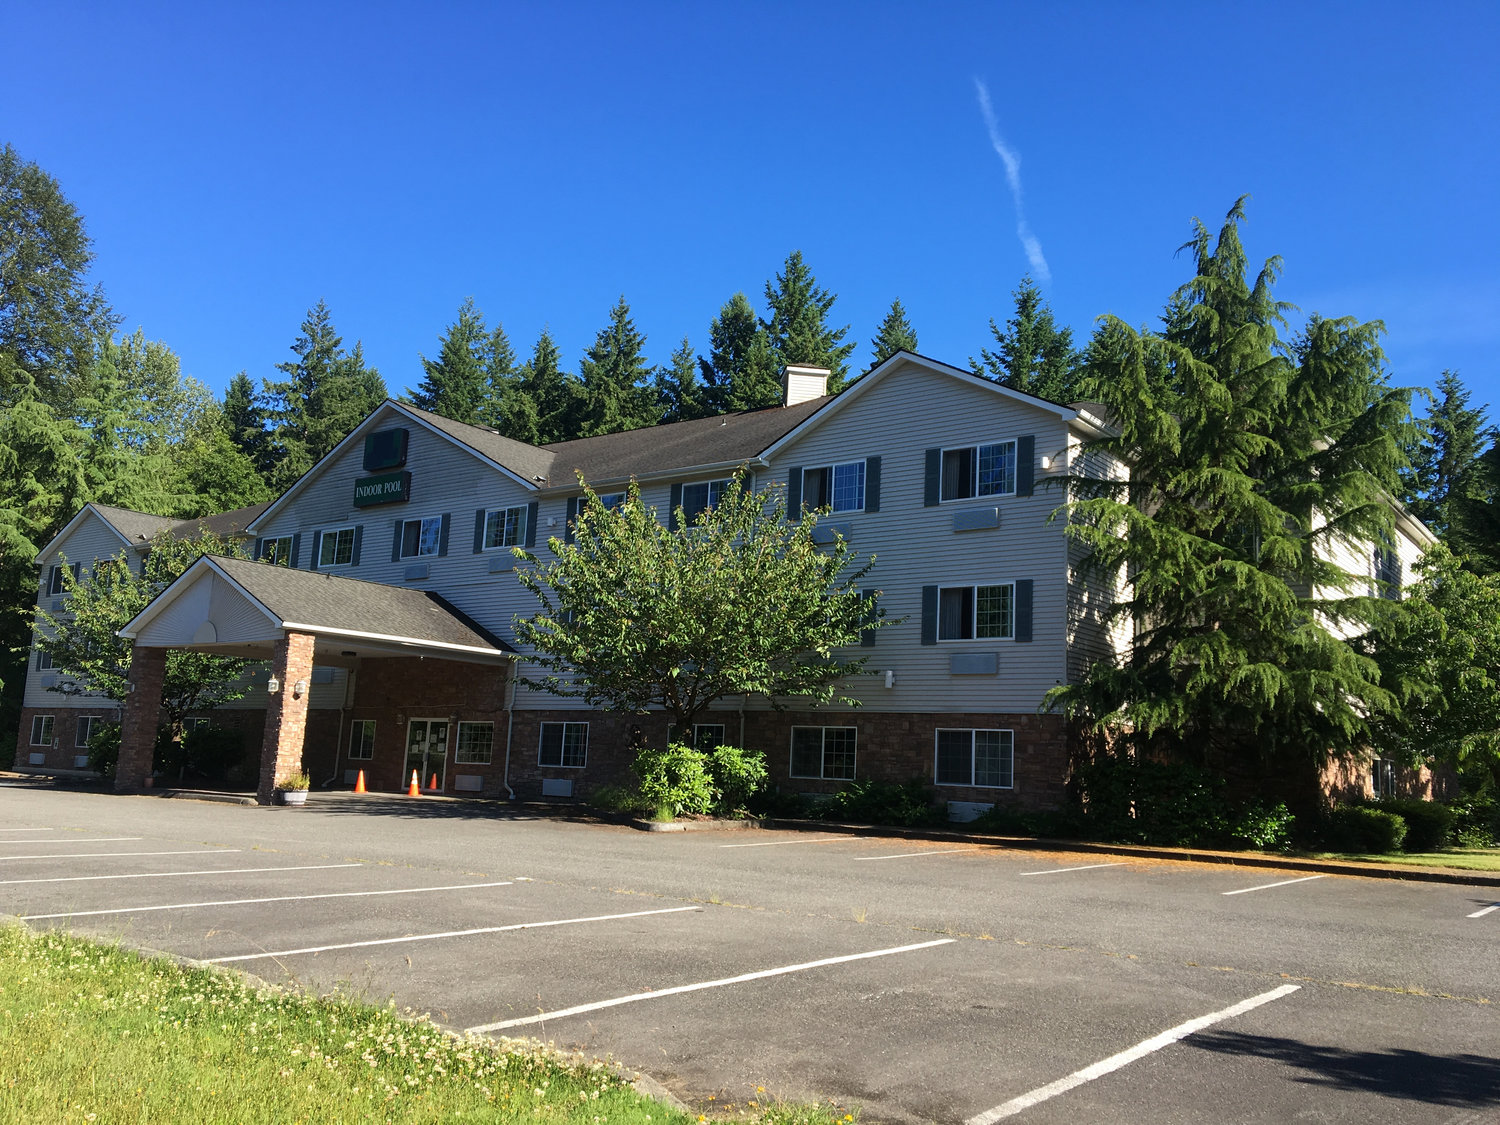 The Thurston County Housing Authority is interested in purchasing the former OYO Hotel in Tumwater, above, and converting it into long-term housing for senior citizens and "neighbors with disabilities."